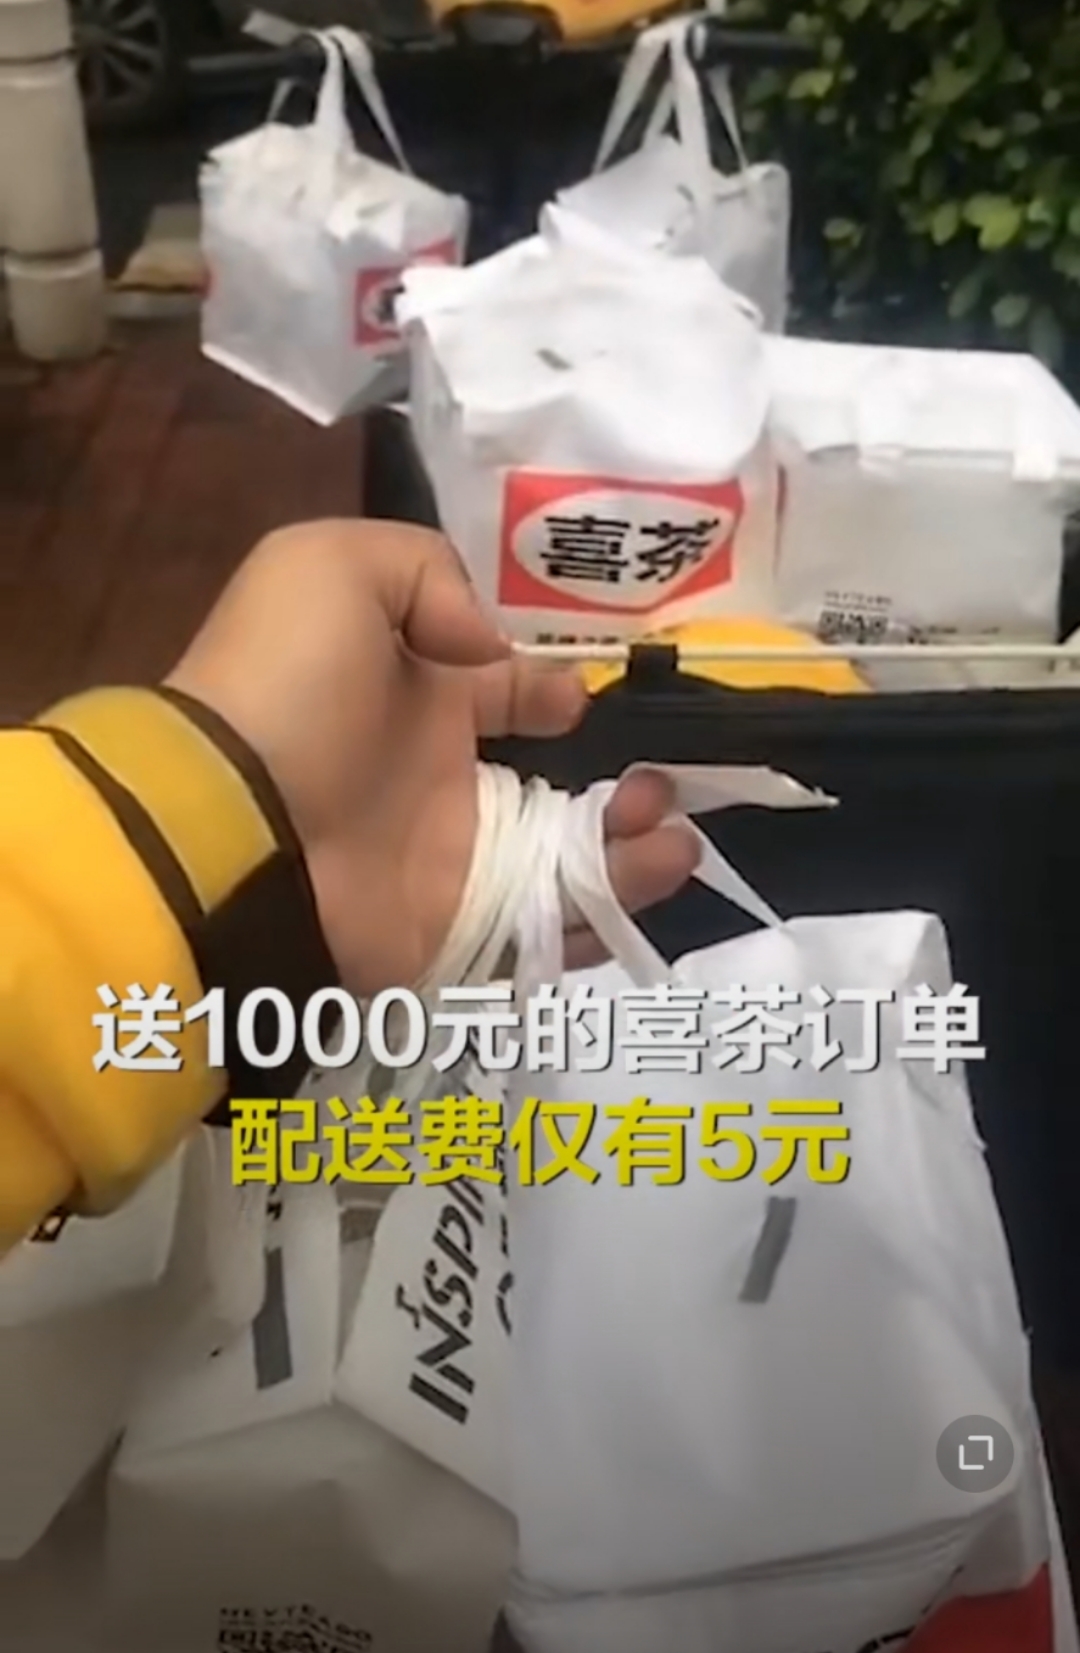 Little elder brother sells to spit groove outside Guangzhou 1000 yuan of order deserve to send cost only 5 yuan, the United States is round: Can apply for big odd allowance